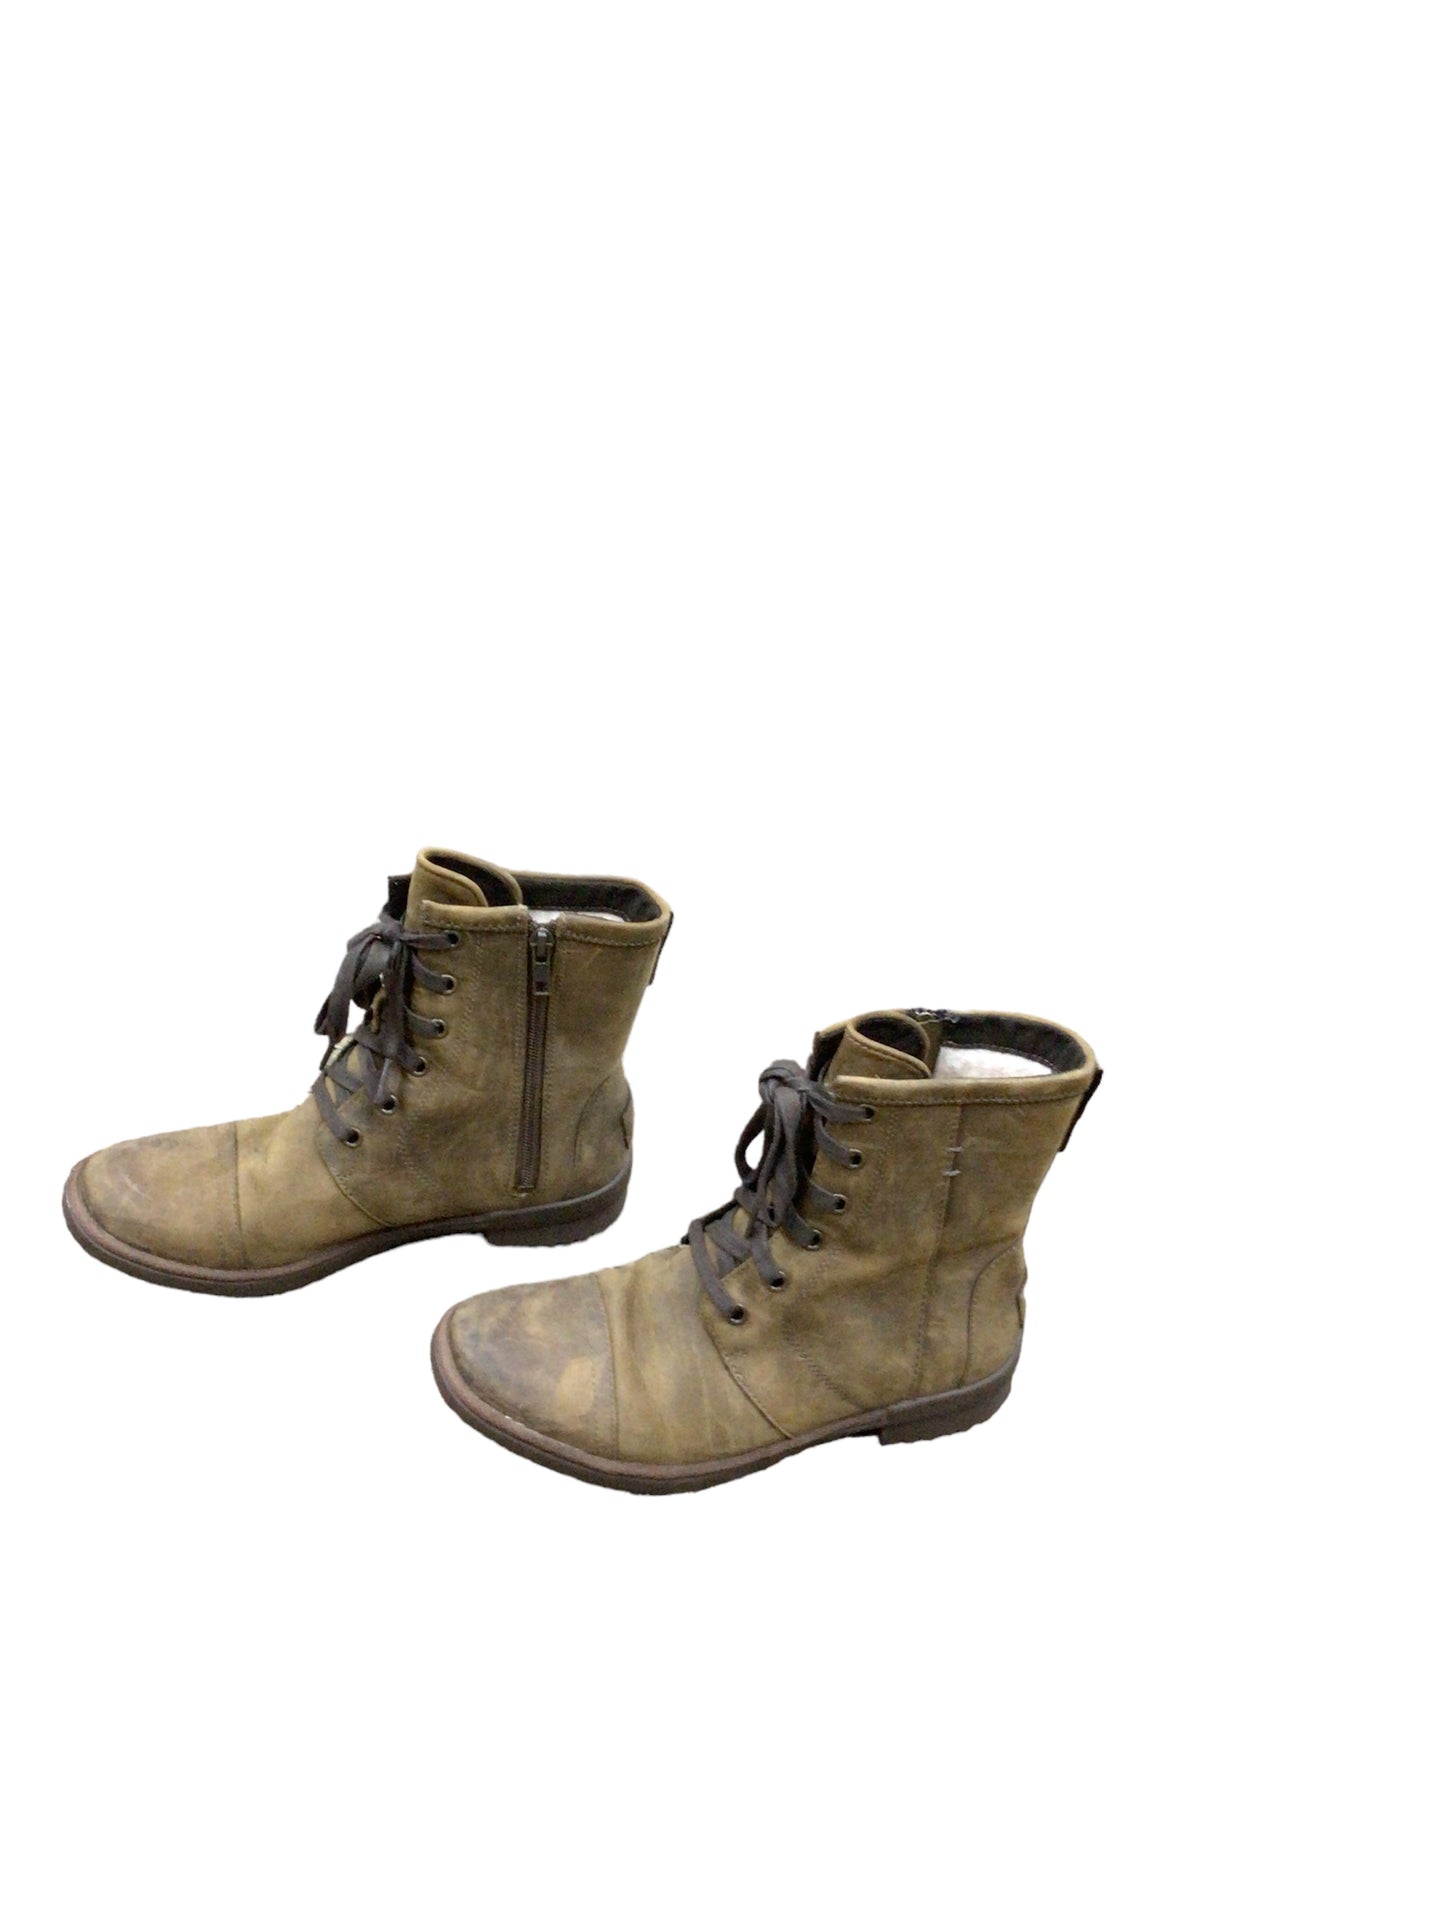 Boots Leather By Ugg  Size: 8